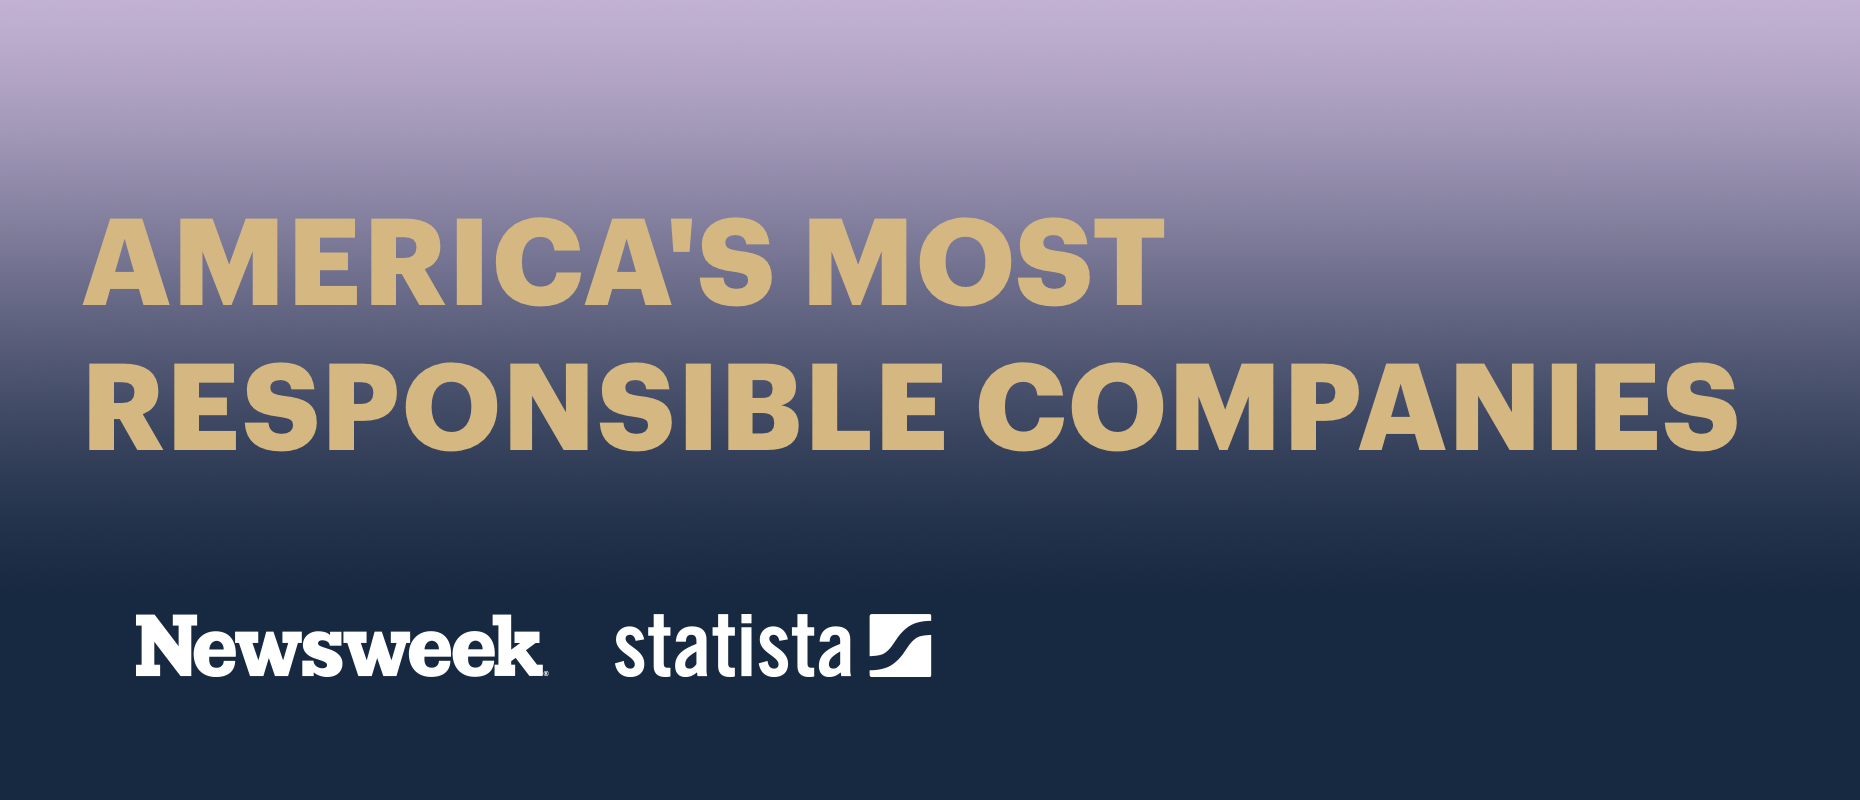 Americas Most Responsible Companies